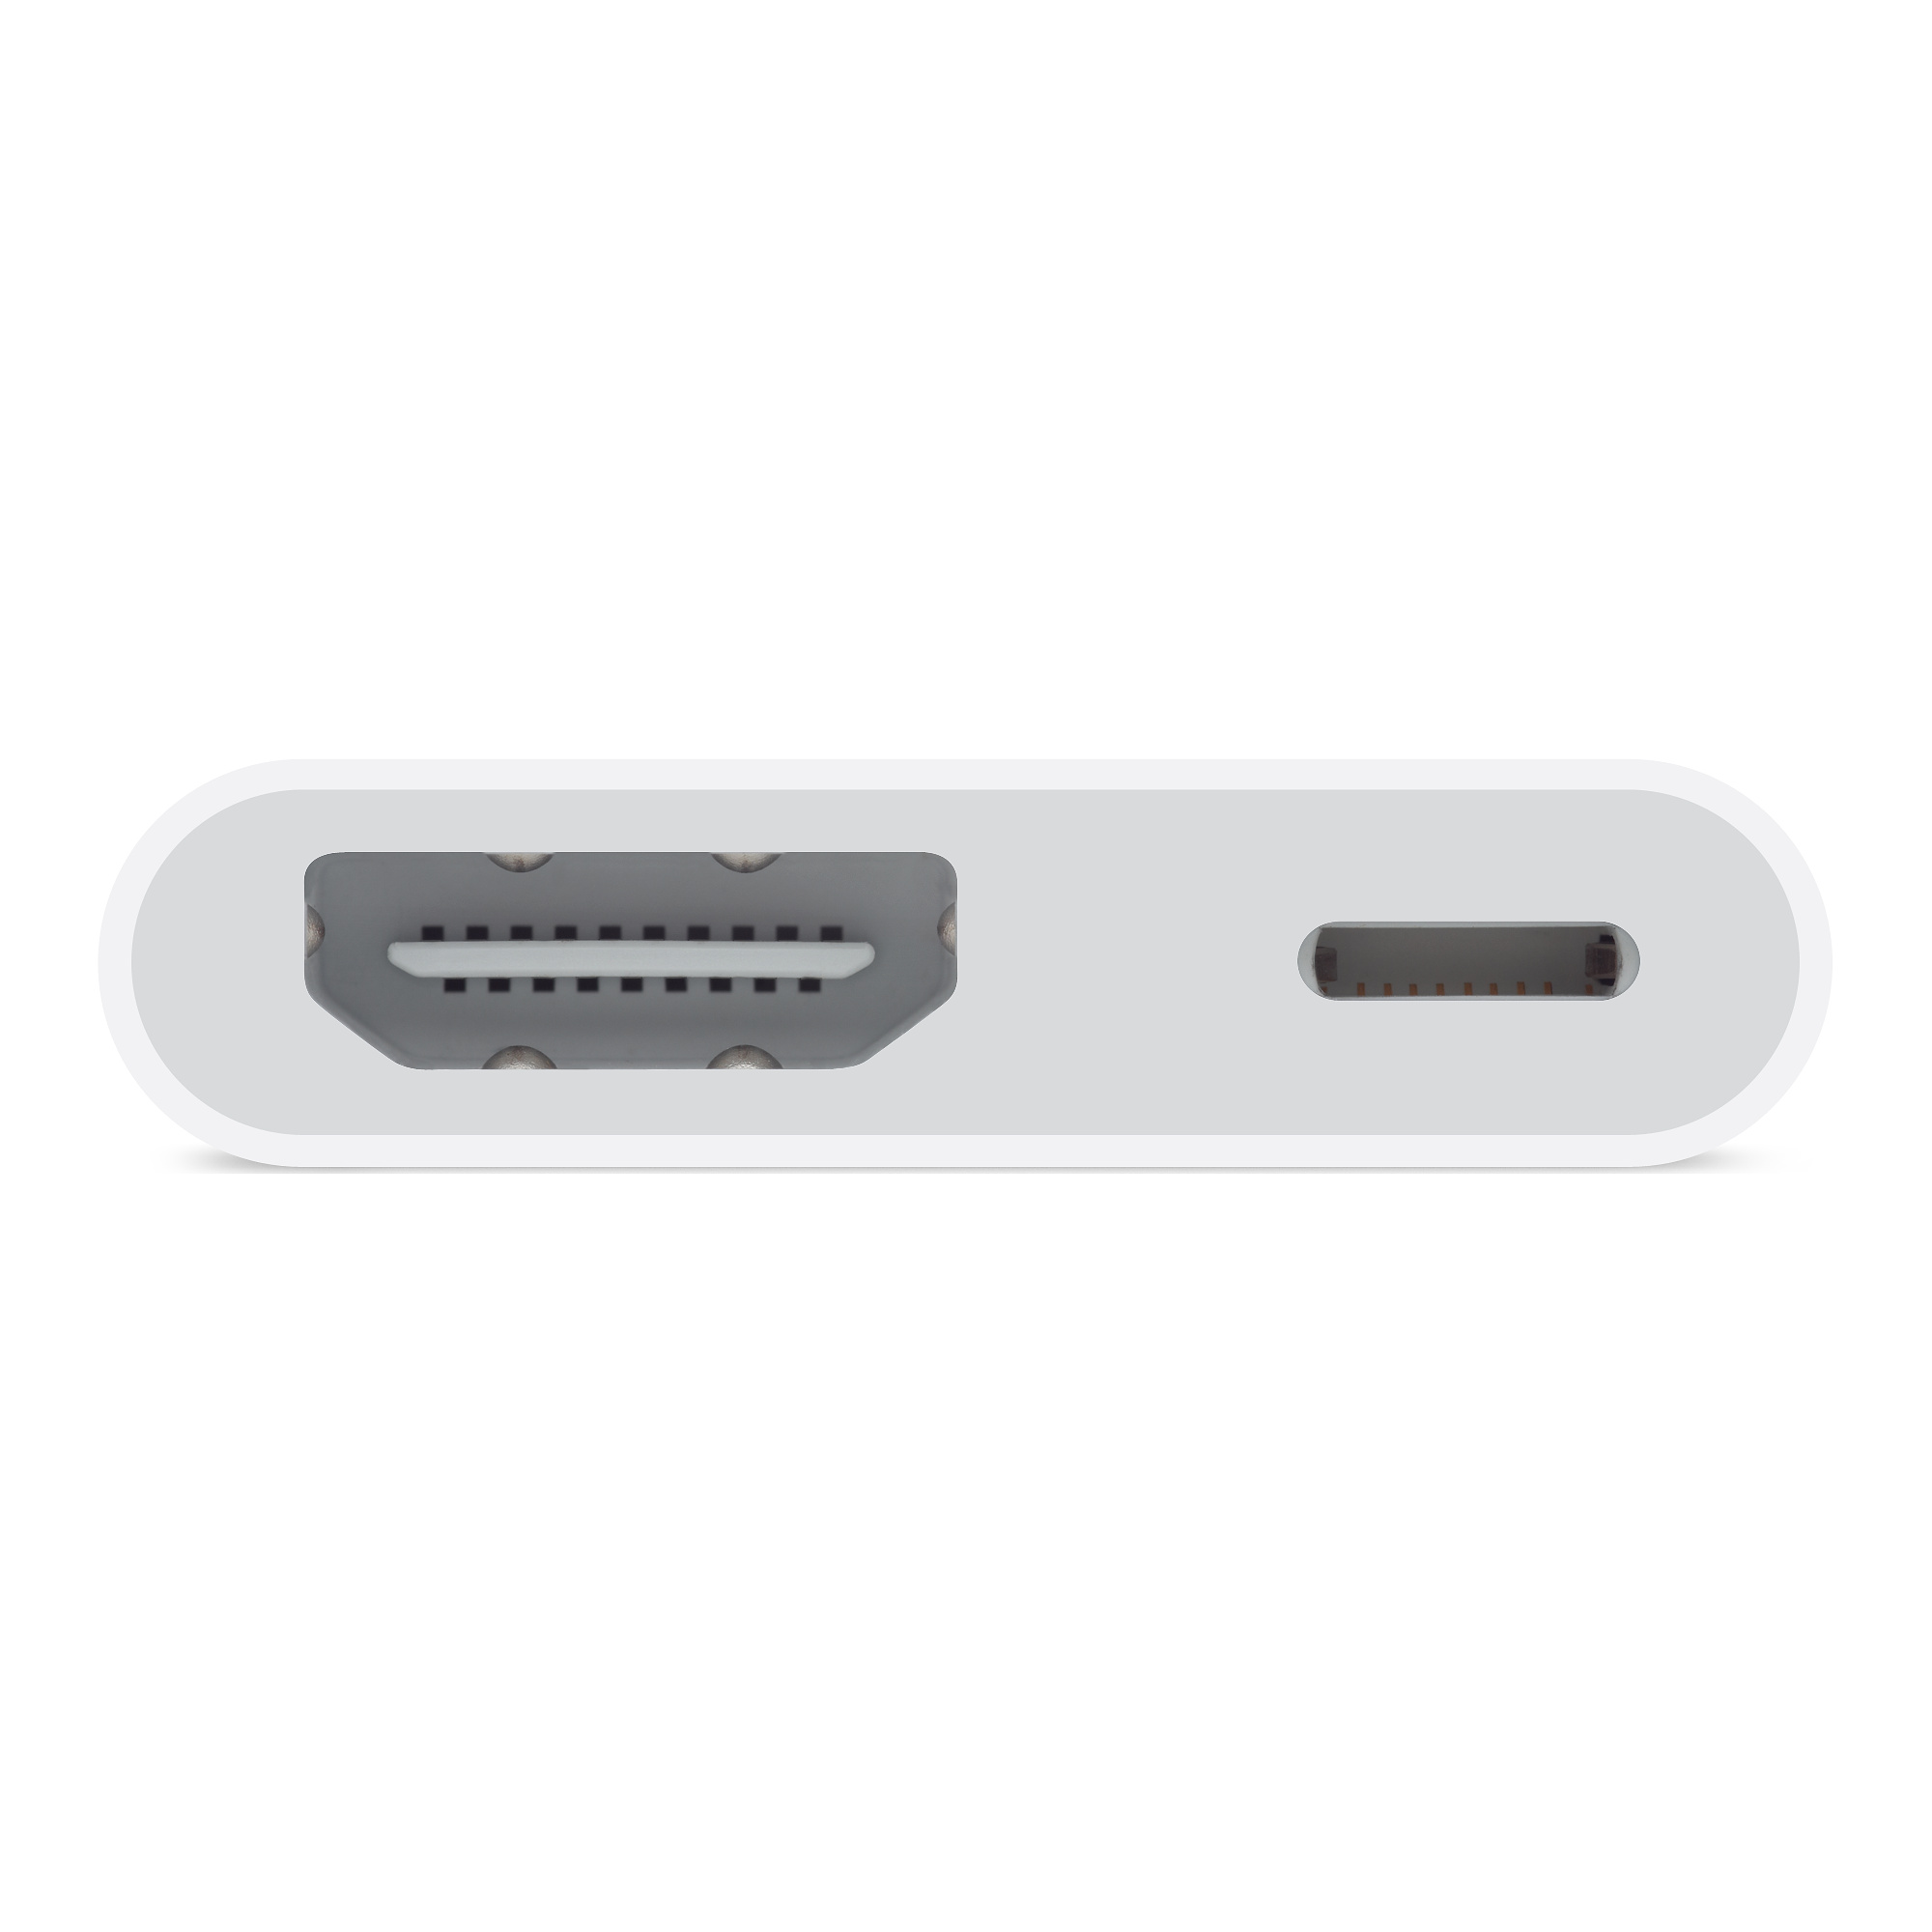 Apple Lightning to HDMI Adapter - Lâm Phong Store